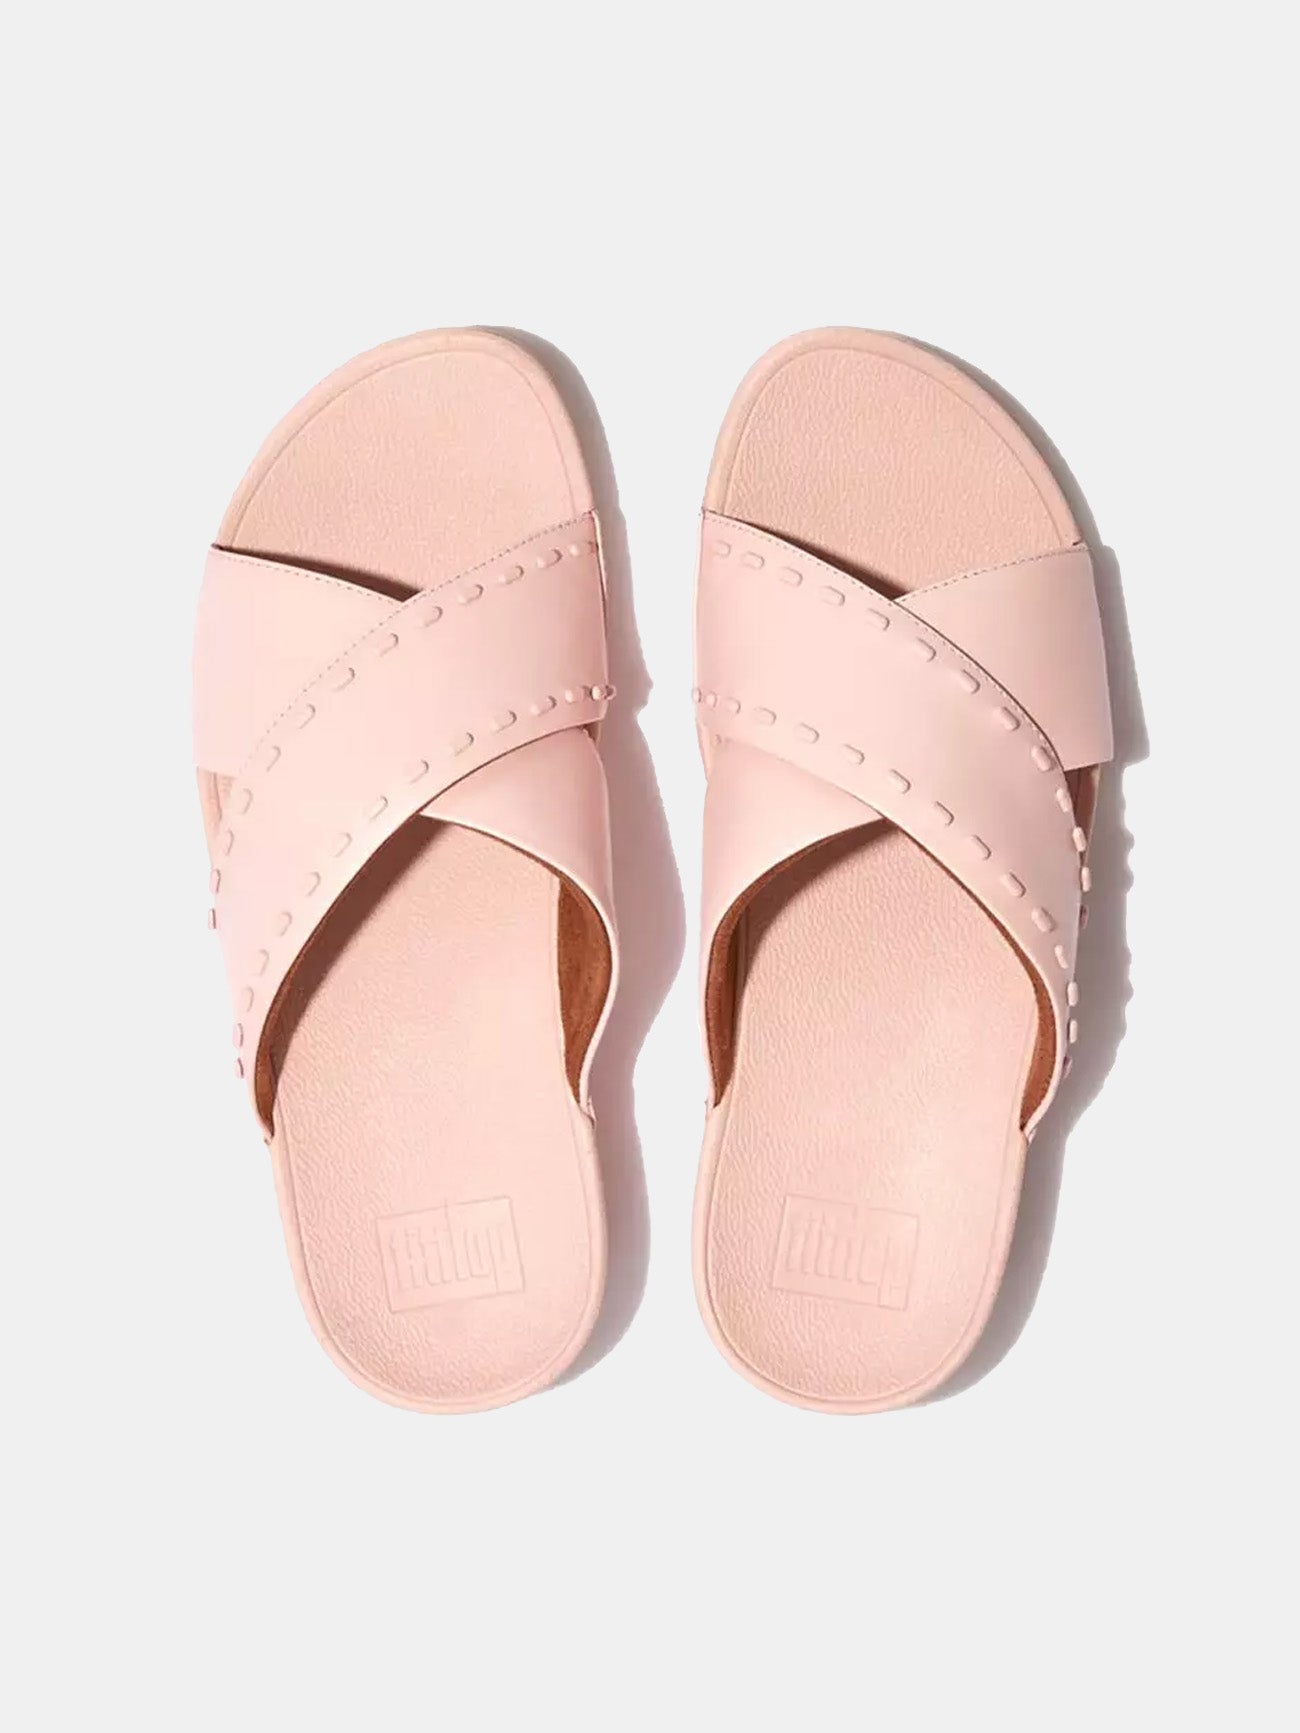 Fitflop Women's Lulu Rubber-Stud Leather Cross Slides #color_Pink